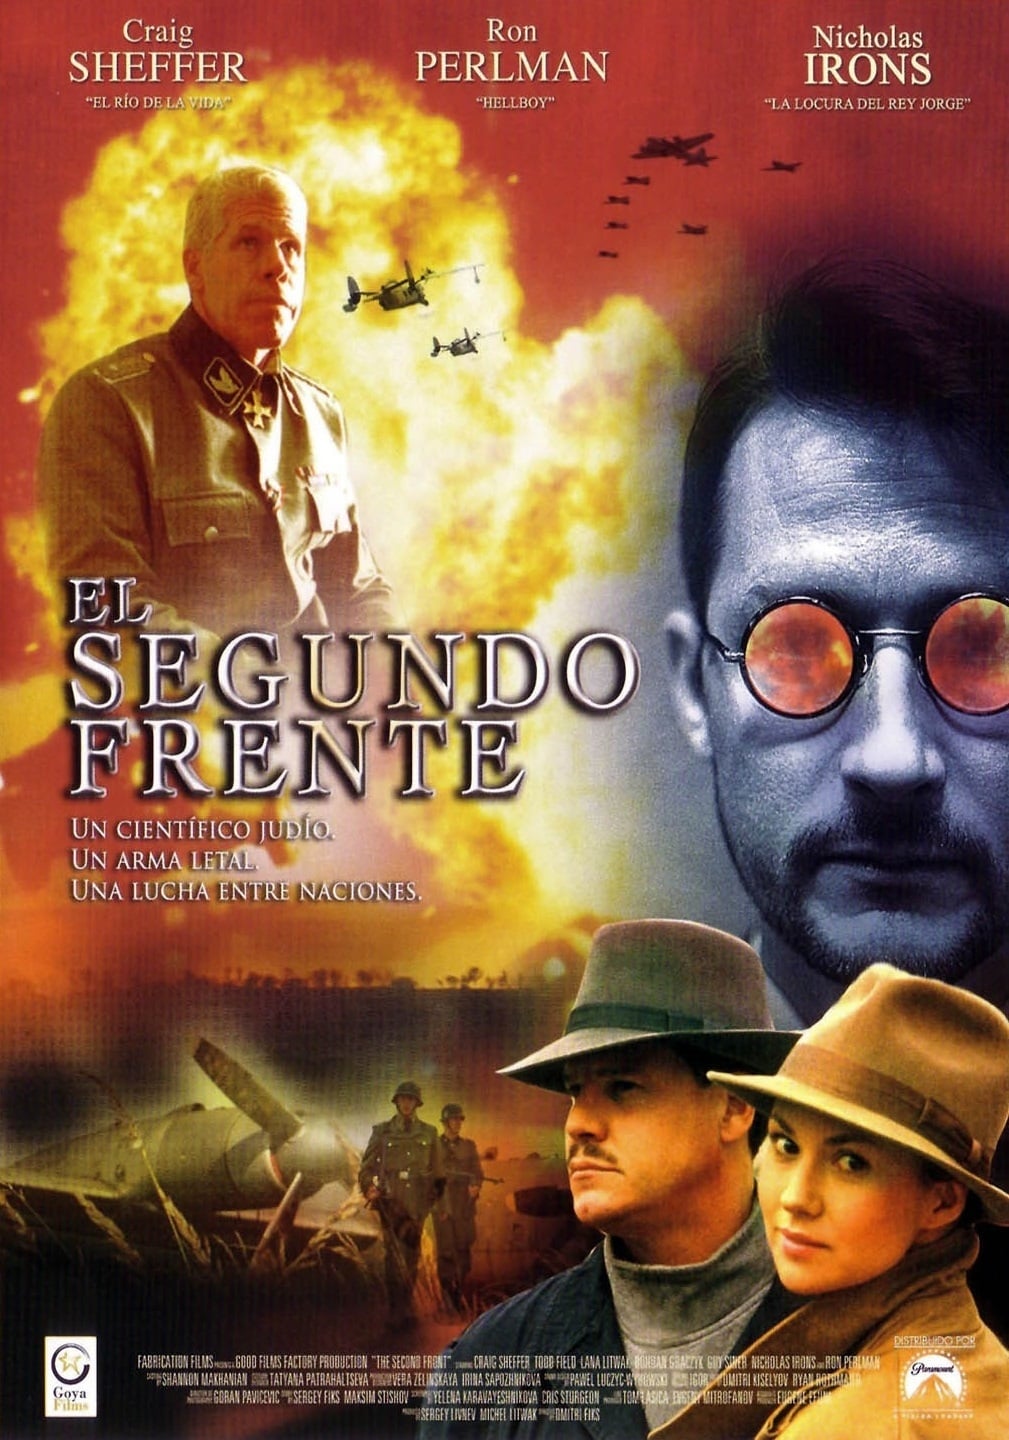 The Second Front (2005)